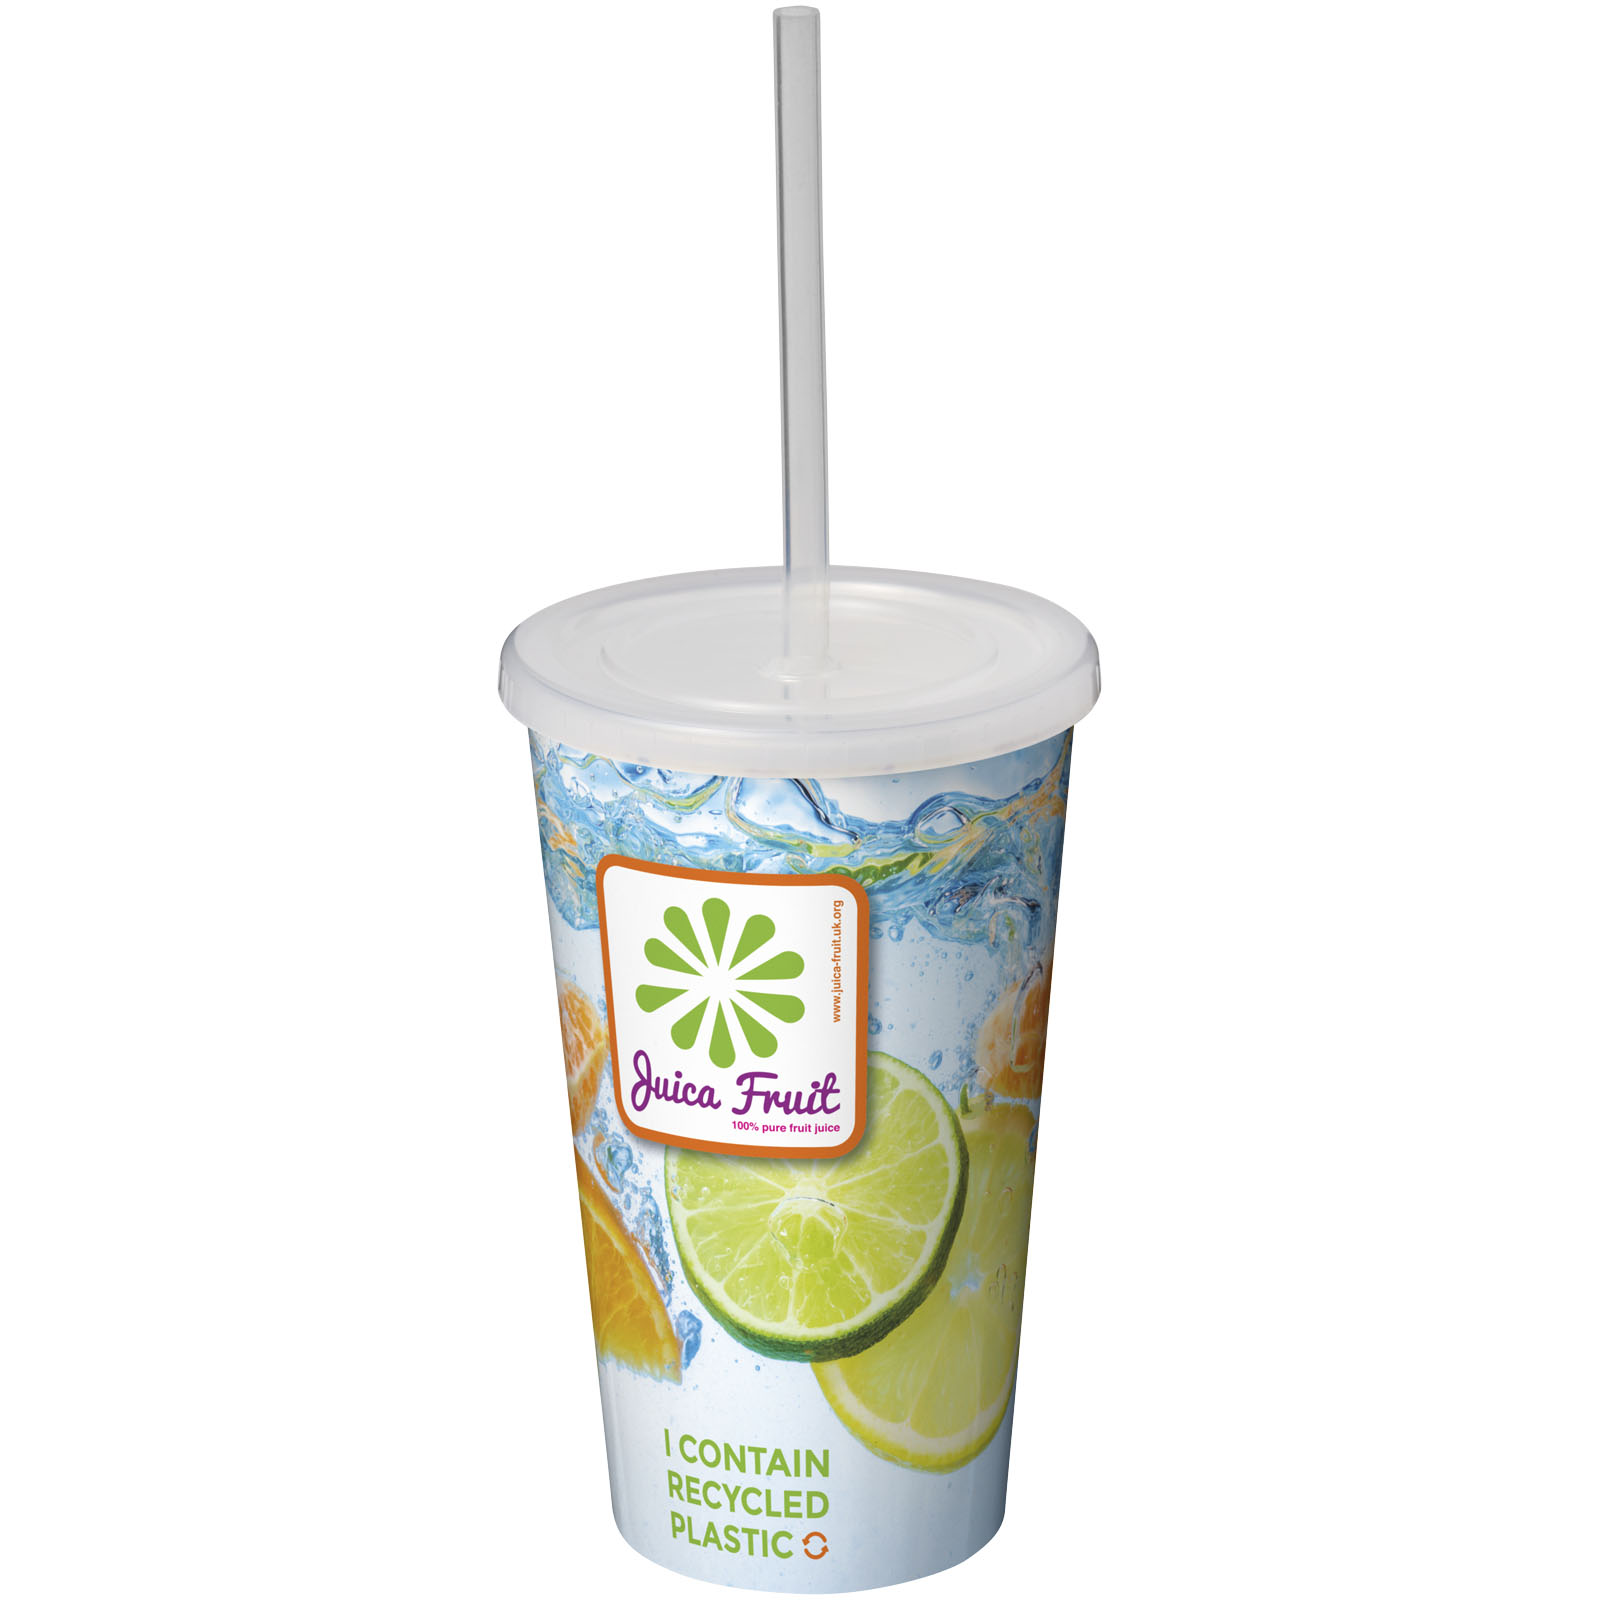 A double-walled insulated tumbler made of recycled plastic that comes with a straw - Pitlochry